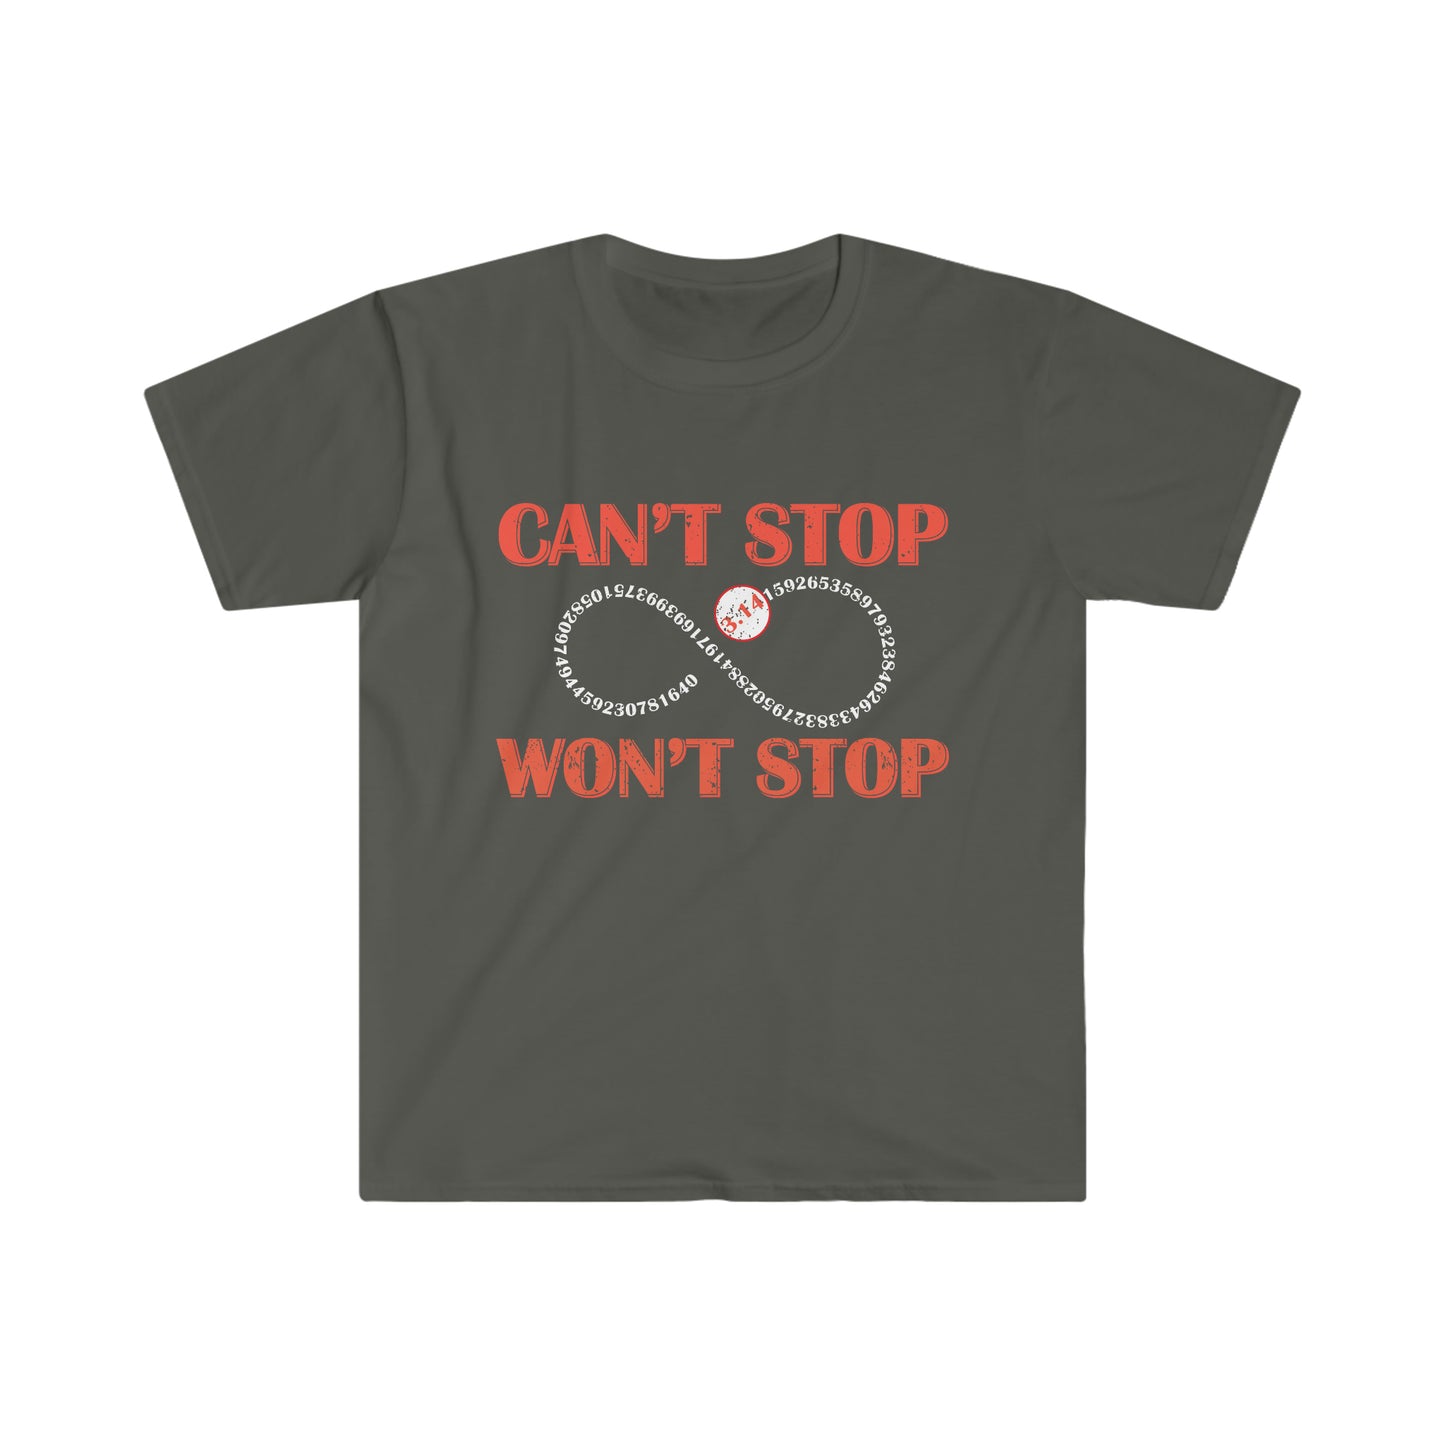 Can't Stop T-Shirt